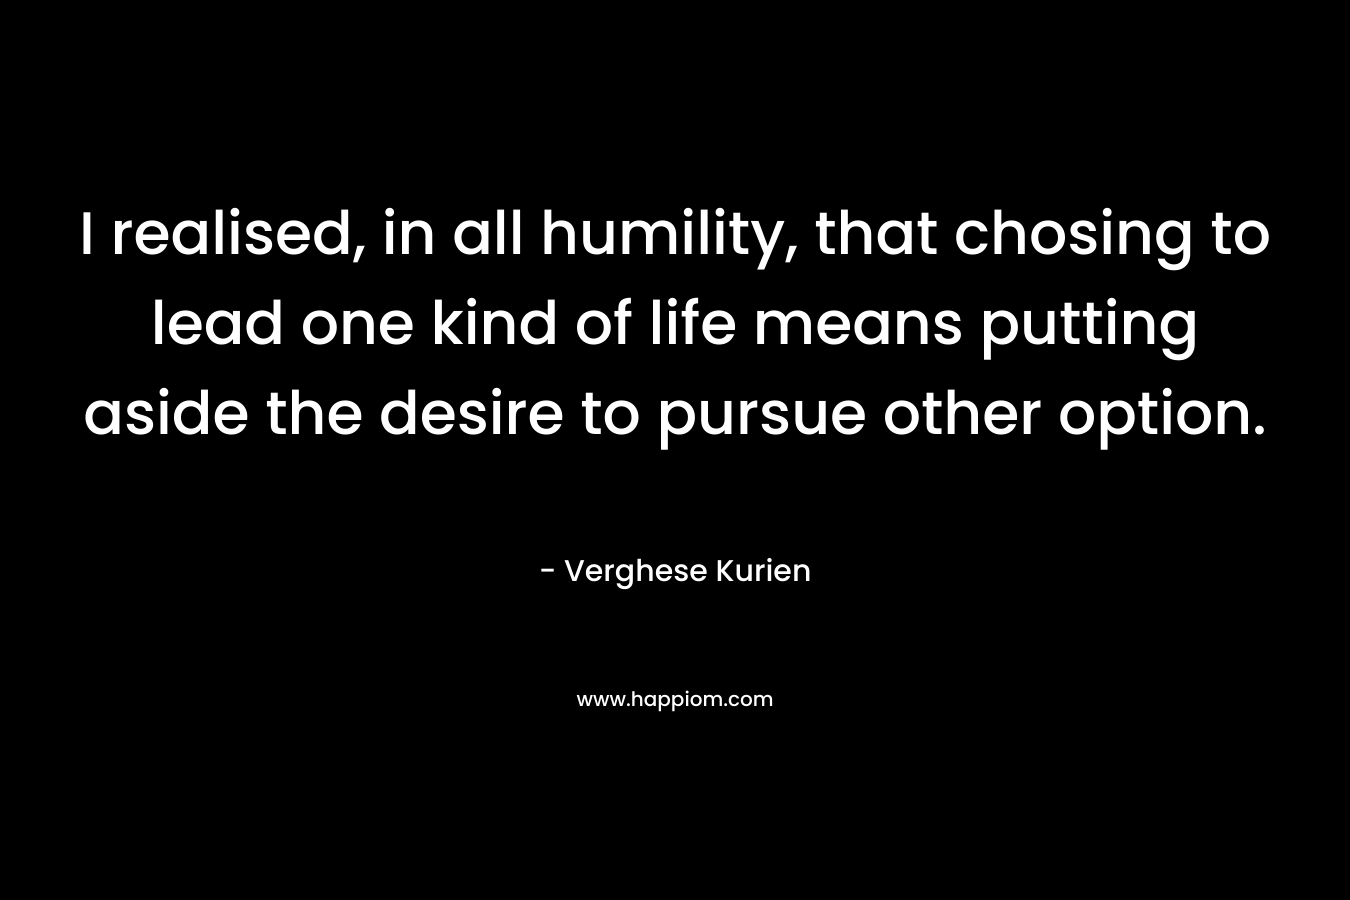 I realised, in all humility, that chosing to lead one kind of life means putting aside the desire to pursue other option. – Verghese Kurien